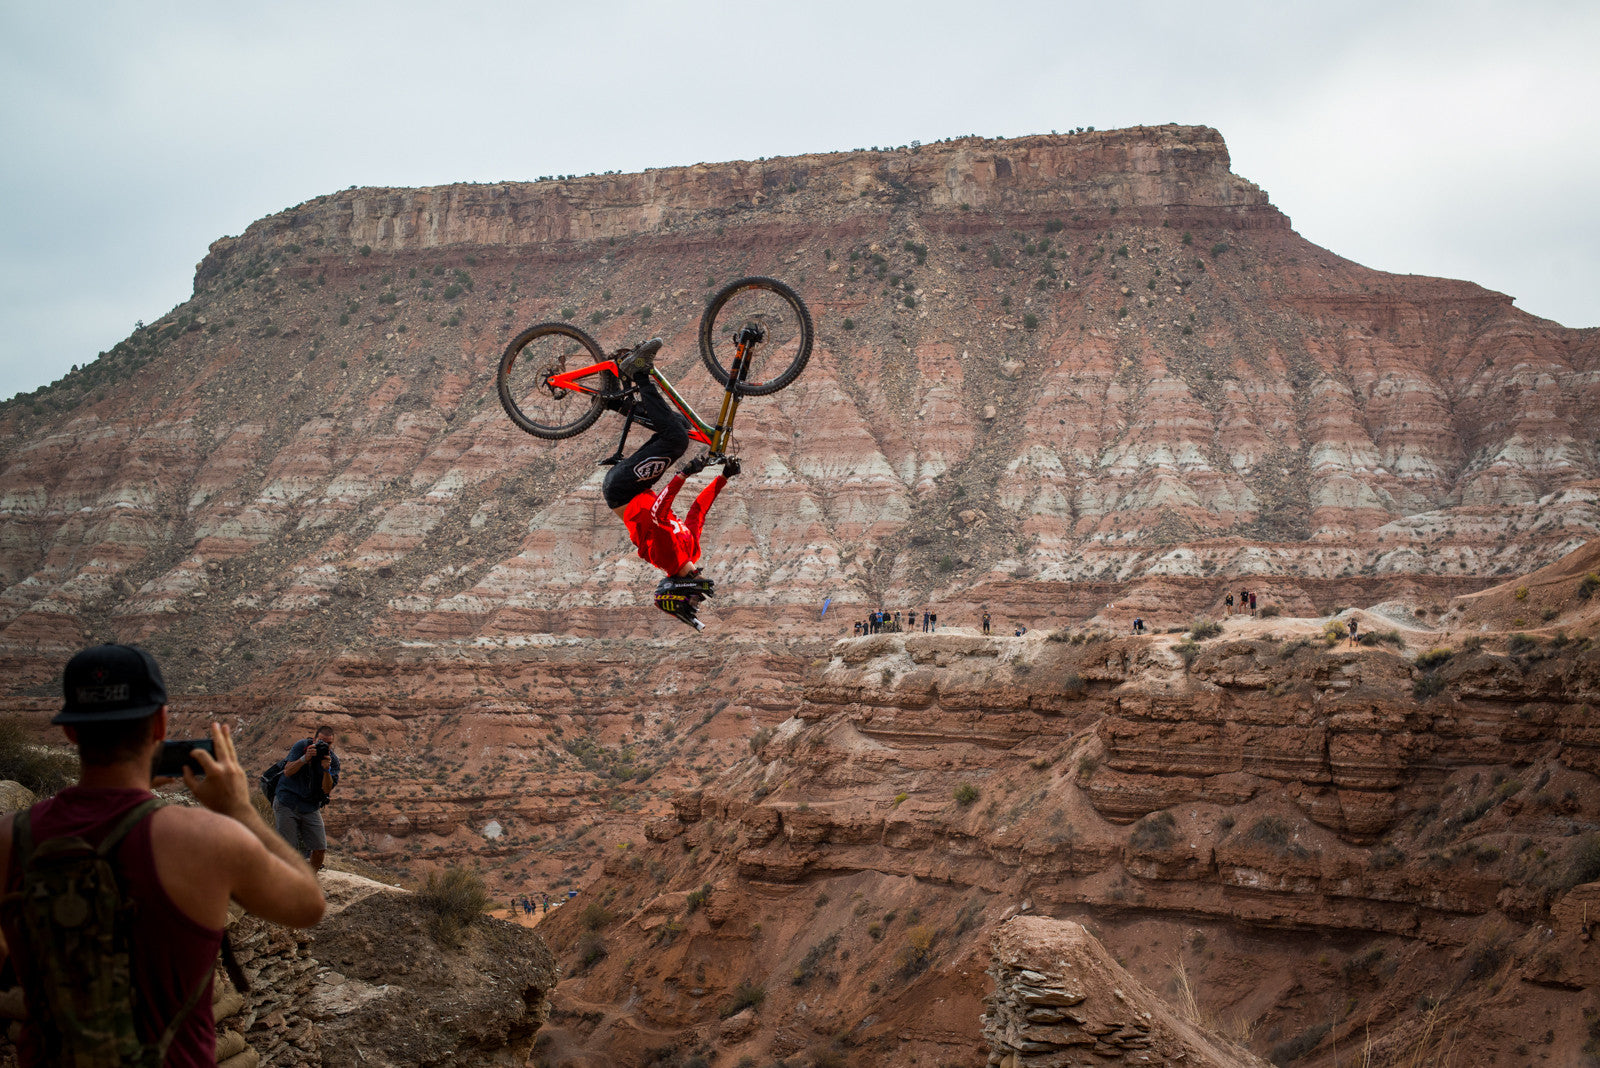 Red bull ramage line up 2021, who is riding in redbull ramage, red bull rampage 2021, redbull rampage, thread + spoke, 